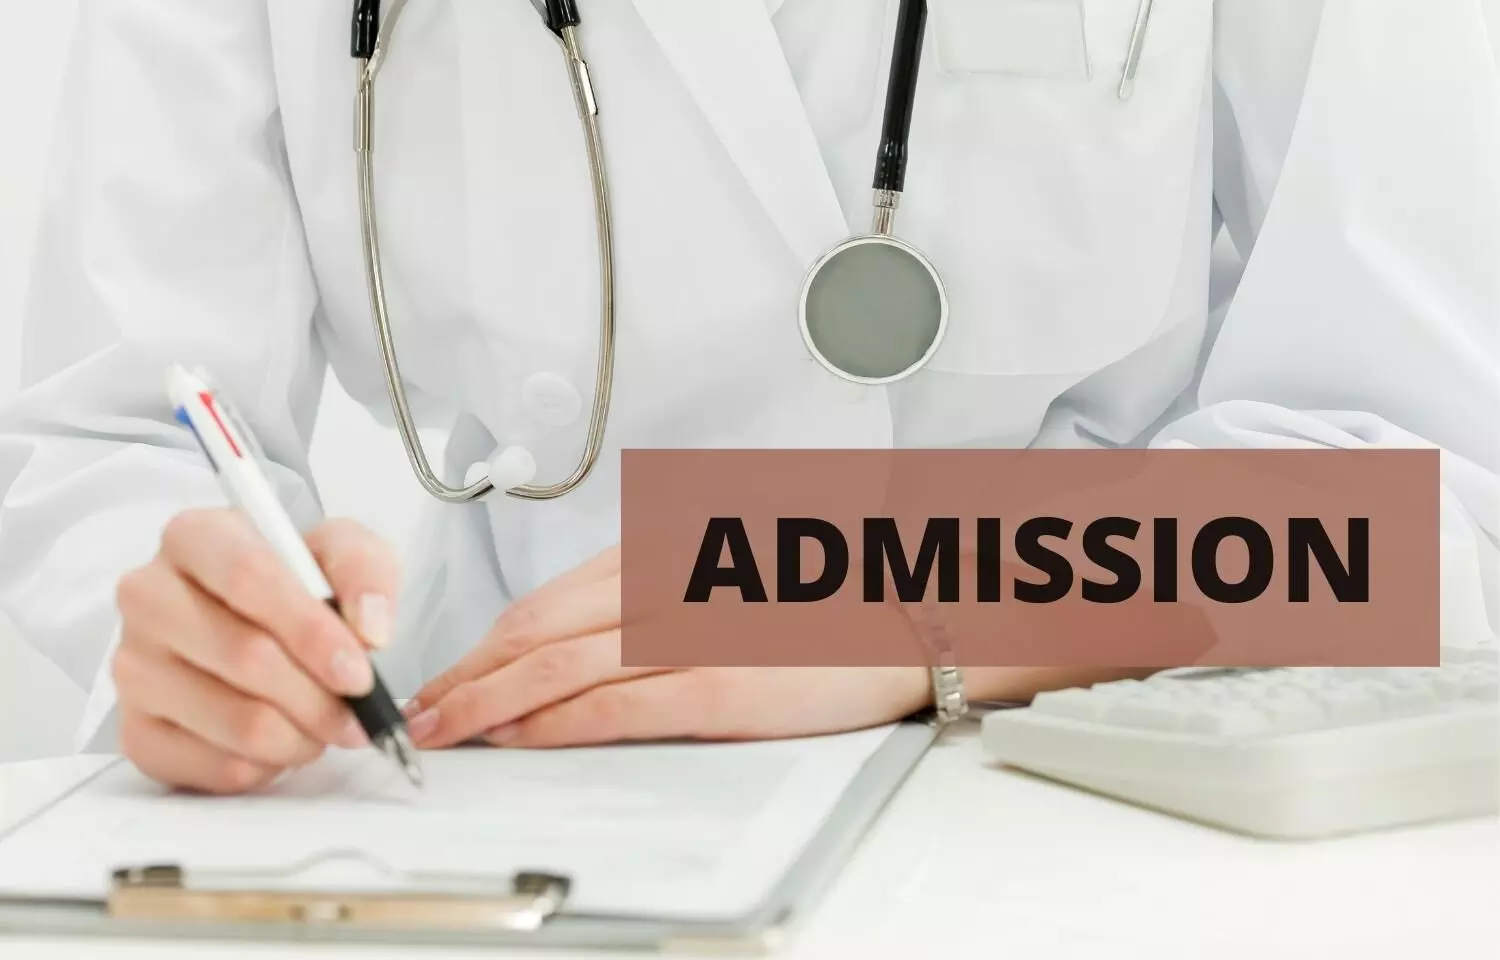 TN Health invites applications for Post Basic BSc Nursing, Diploma in Psychiatry Nursing; 100 seats up for grabs, Check out all admission details